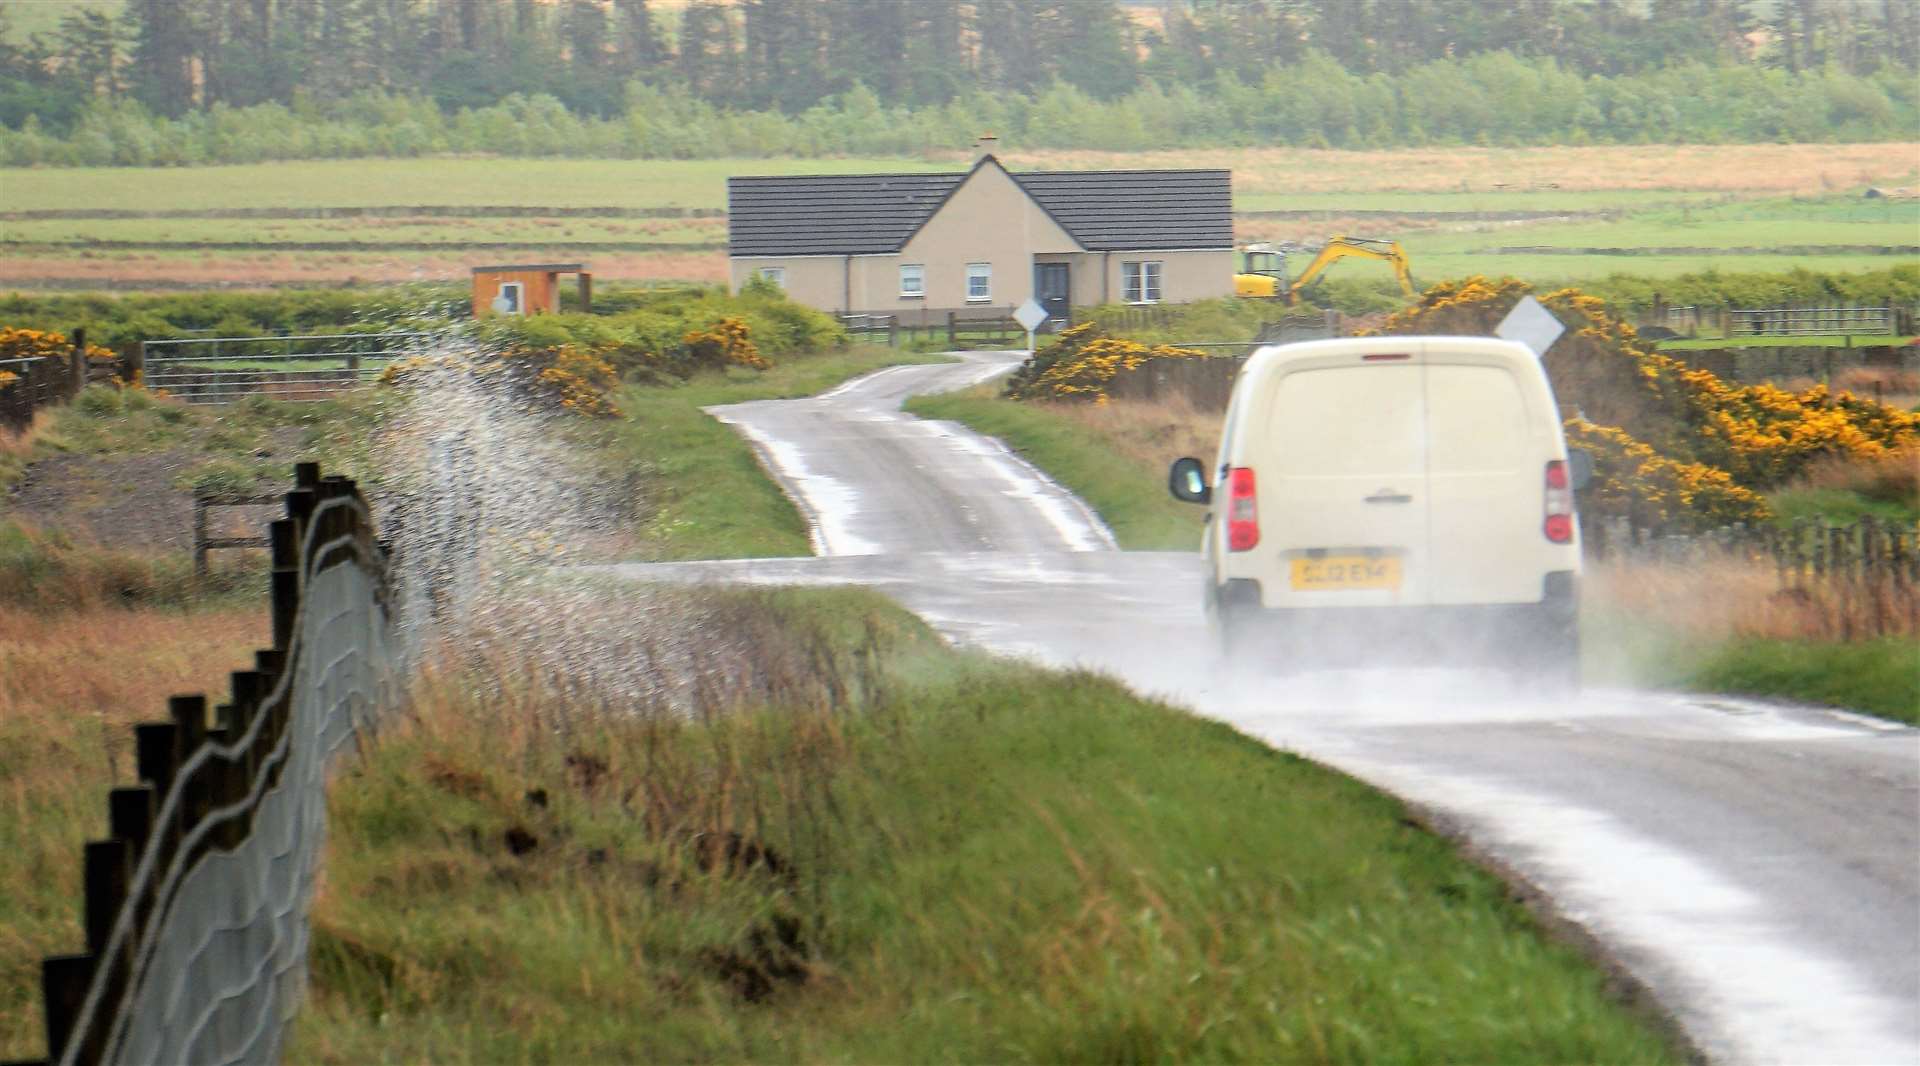 A van hits a puddle and sends up a huge cascade of water that could potentially soak a pedestrian. Picture: DGS